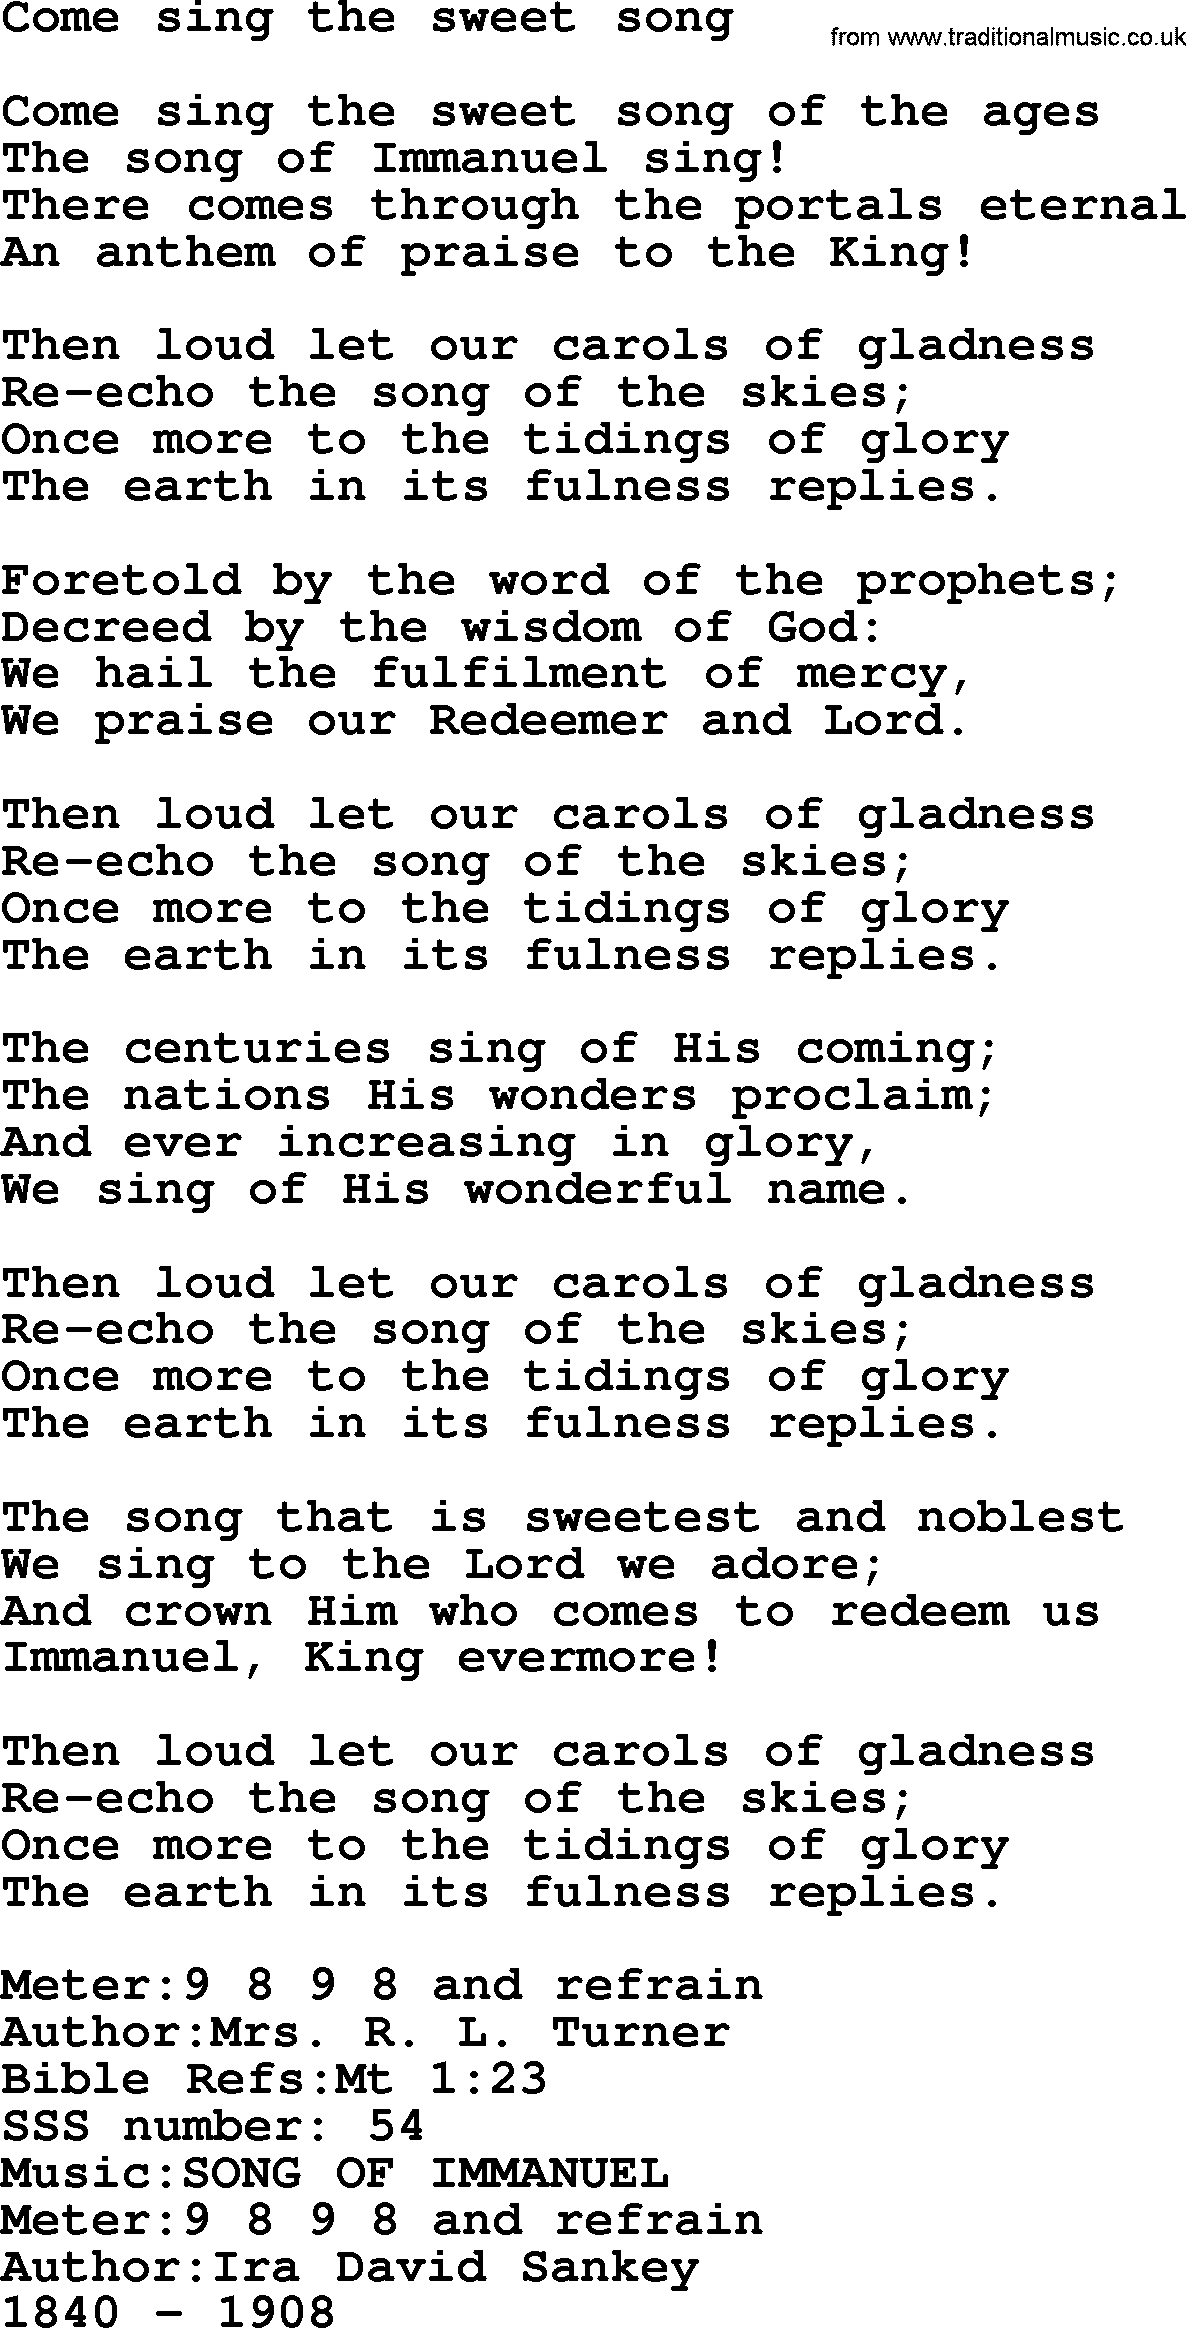 Sacred Songs and Solos complete, 1200 Hymns, title: Come Sing The Sweet Song, lyrics and PDF